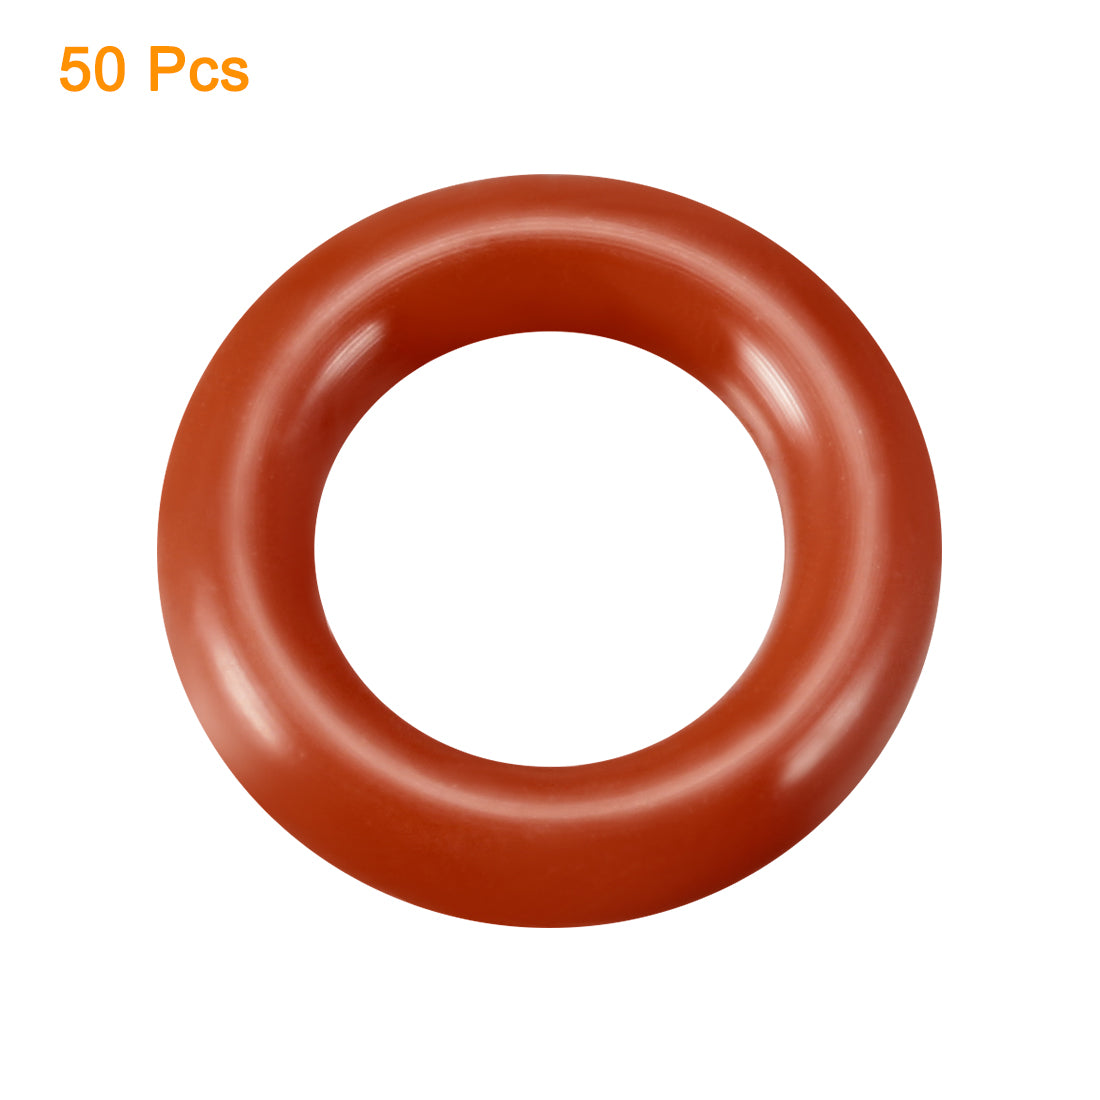 uxcell Uxcell Silicone O-Ring 15mmx8.8mmx3.1mm VMQ Seal Rings Sealing Gasket Red 50PCS